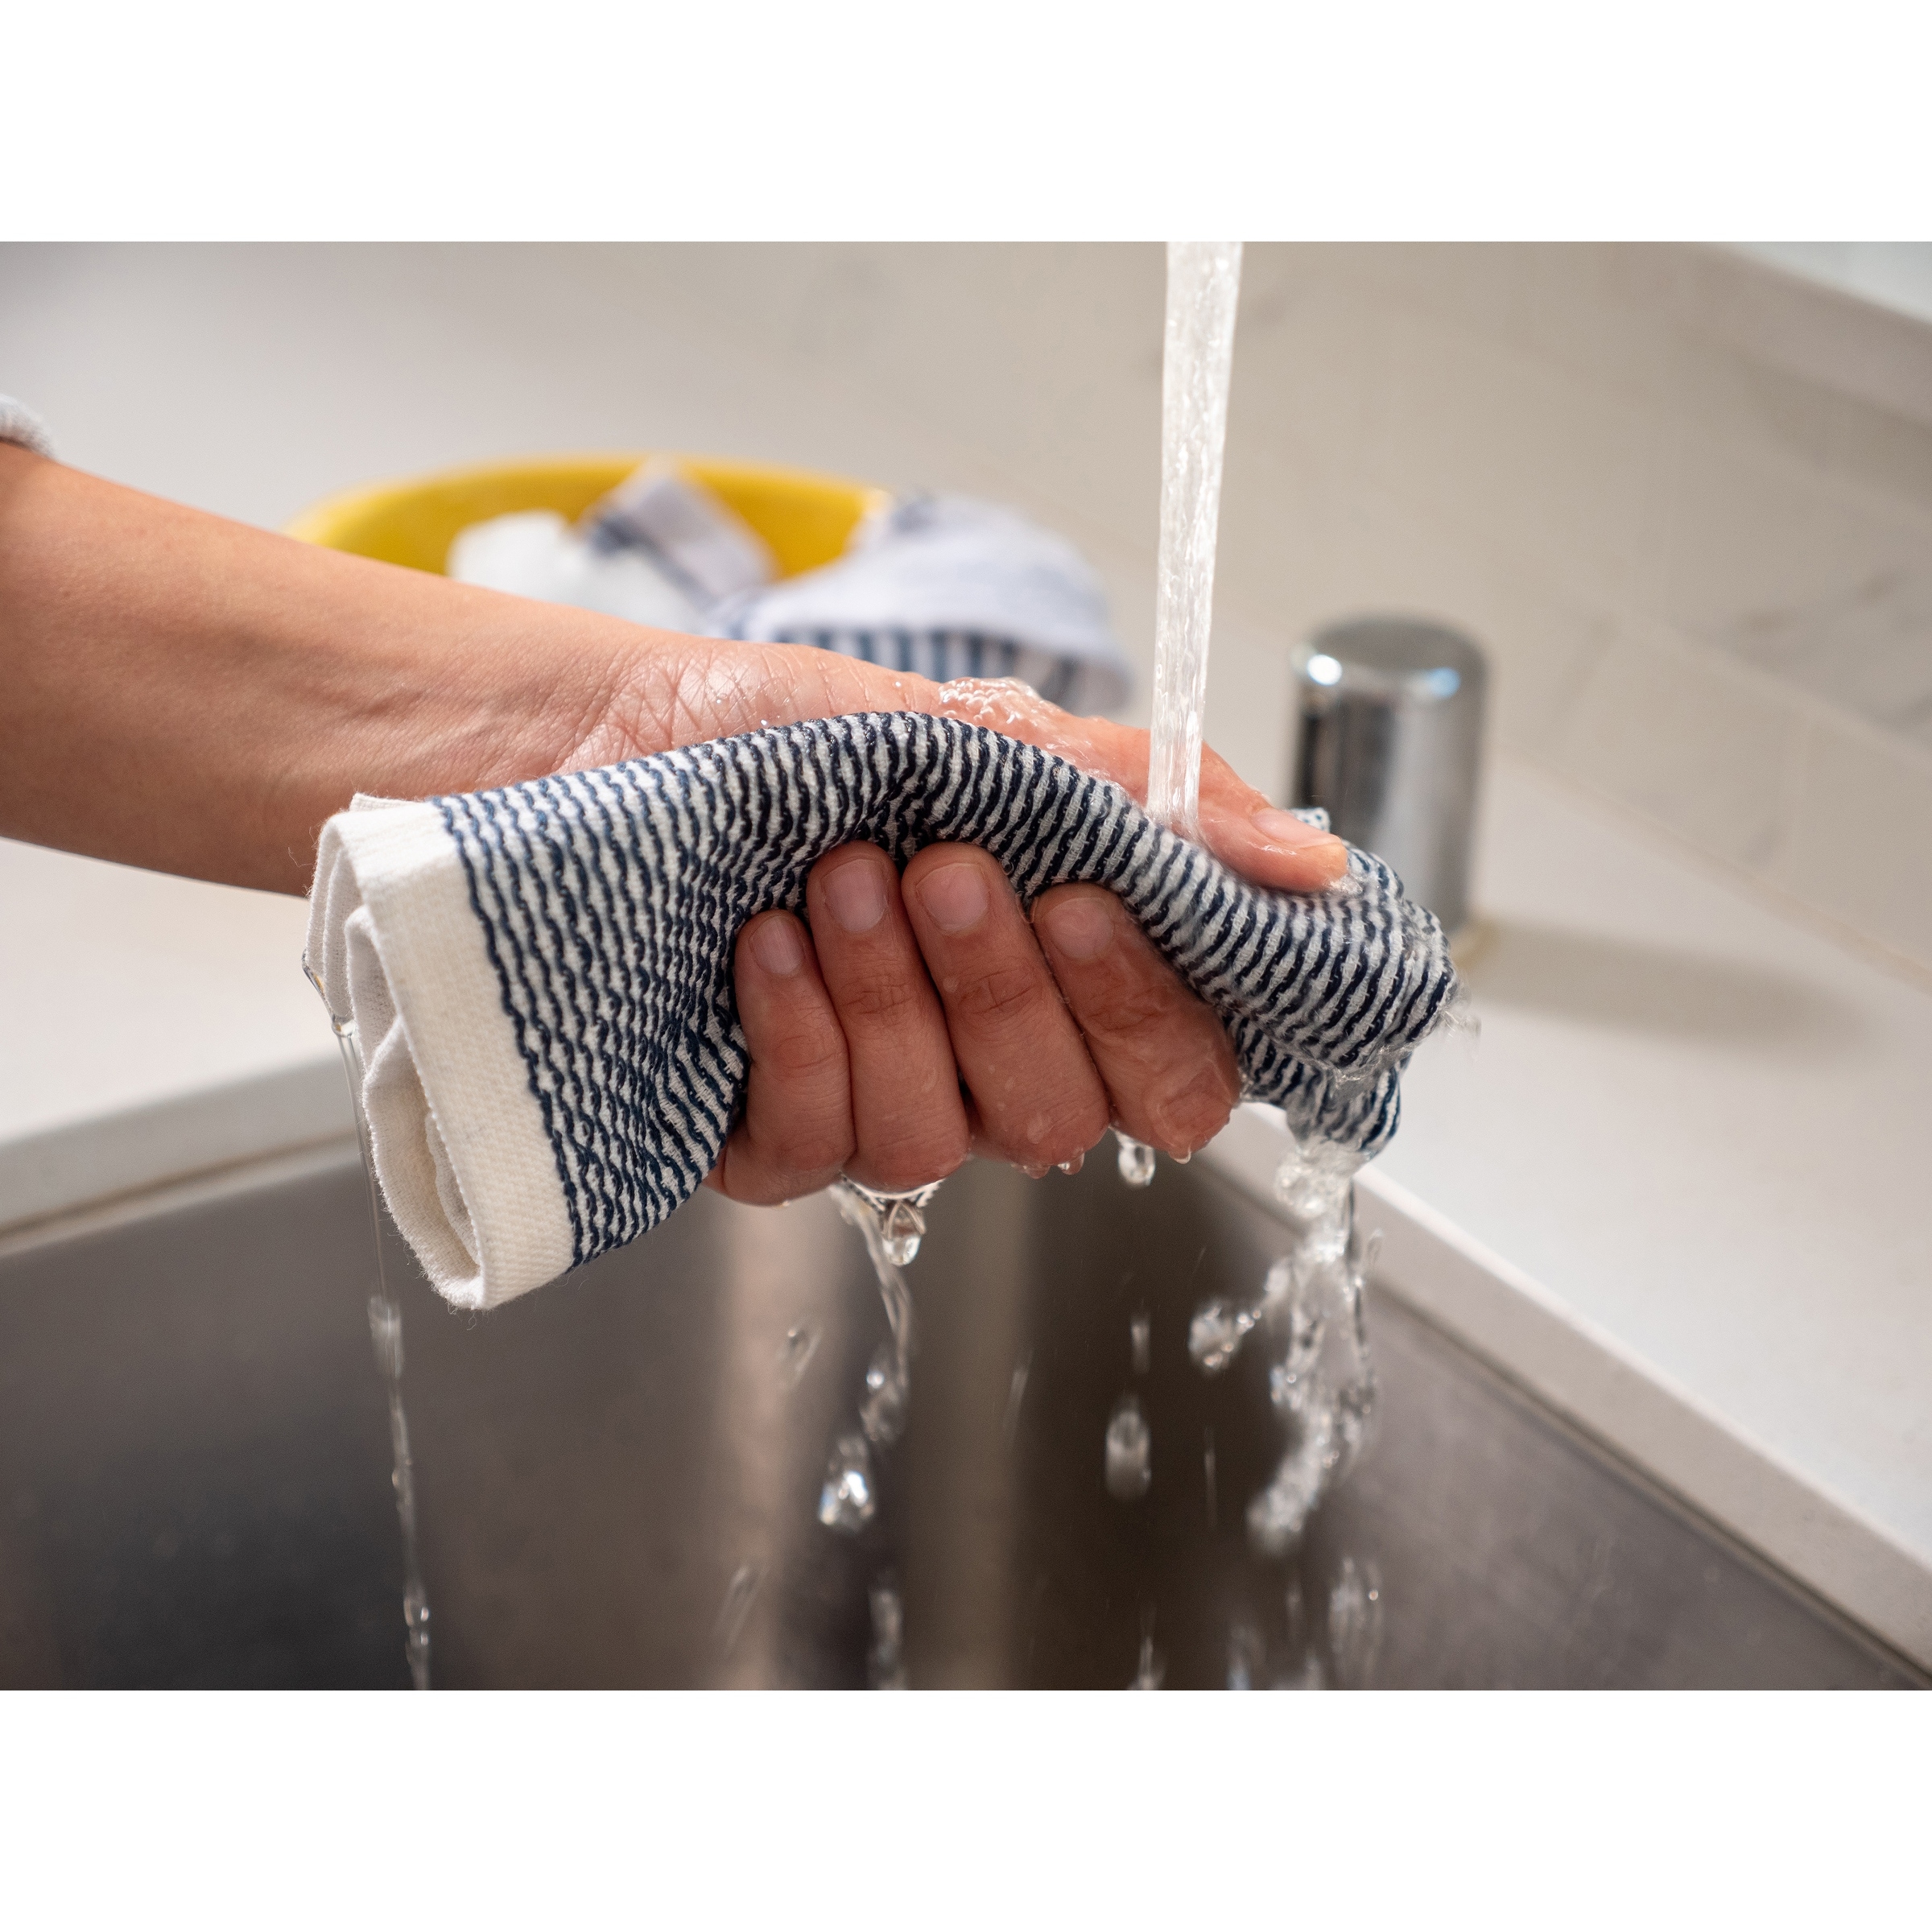 https://ak1.ostkcdn.com/images/products/is/images/direct/777c5bc4138c2c84d97eaea317c3b09bfcae0112/Bed-Bath-and-Beyond-Our-Table-Dual-Purpose-Kitchen-Towels---Set-of-4.jpg